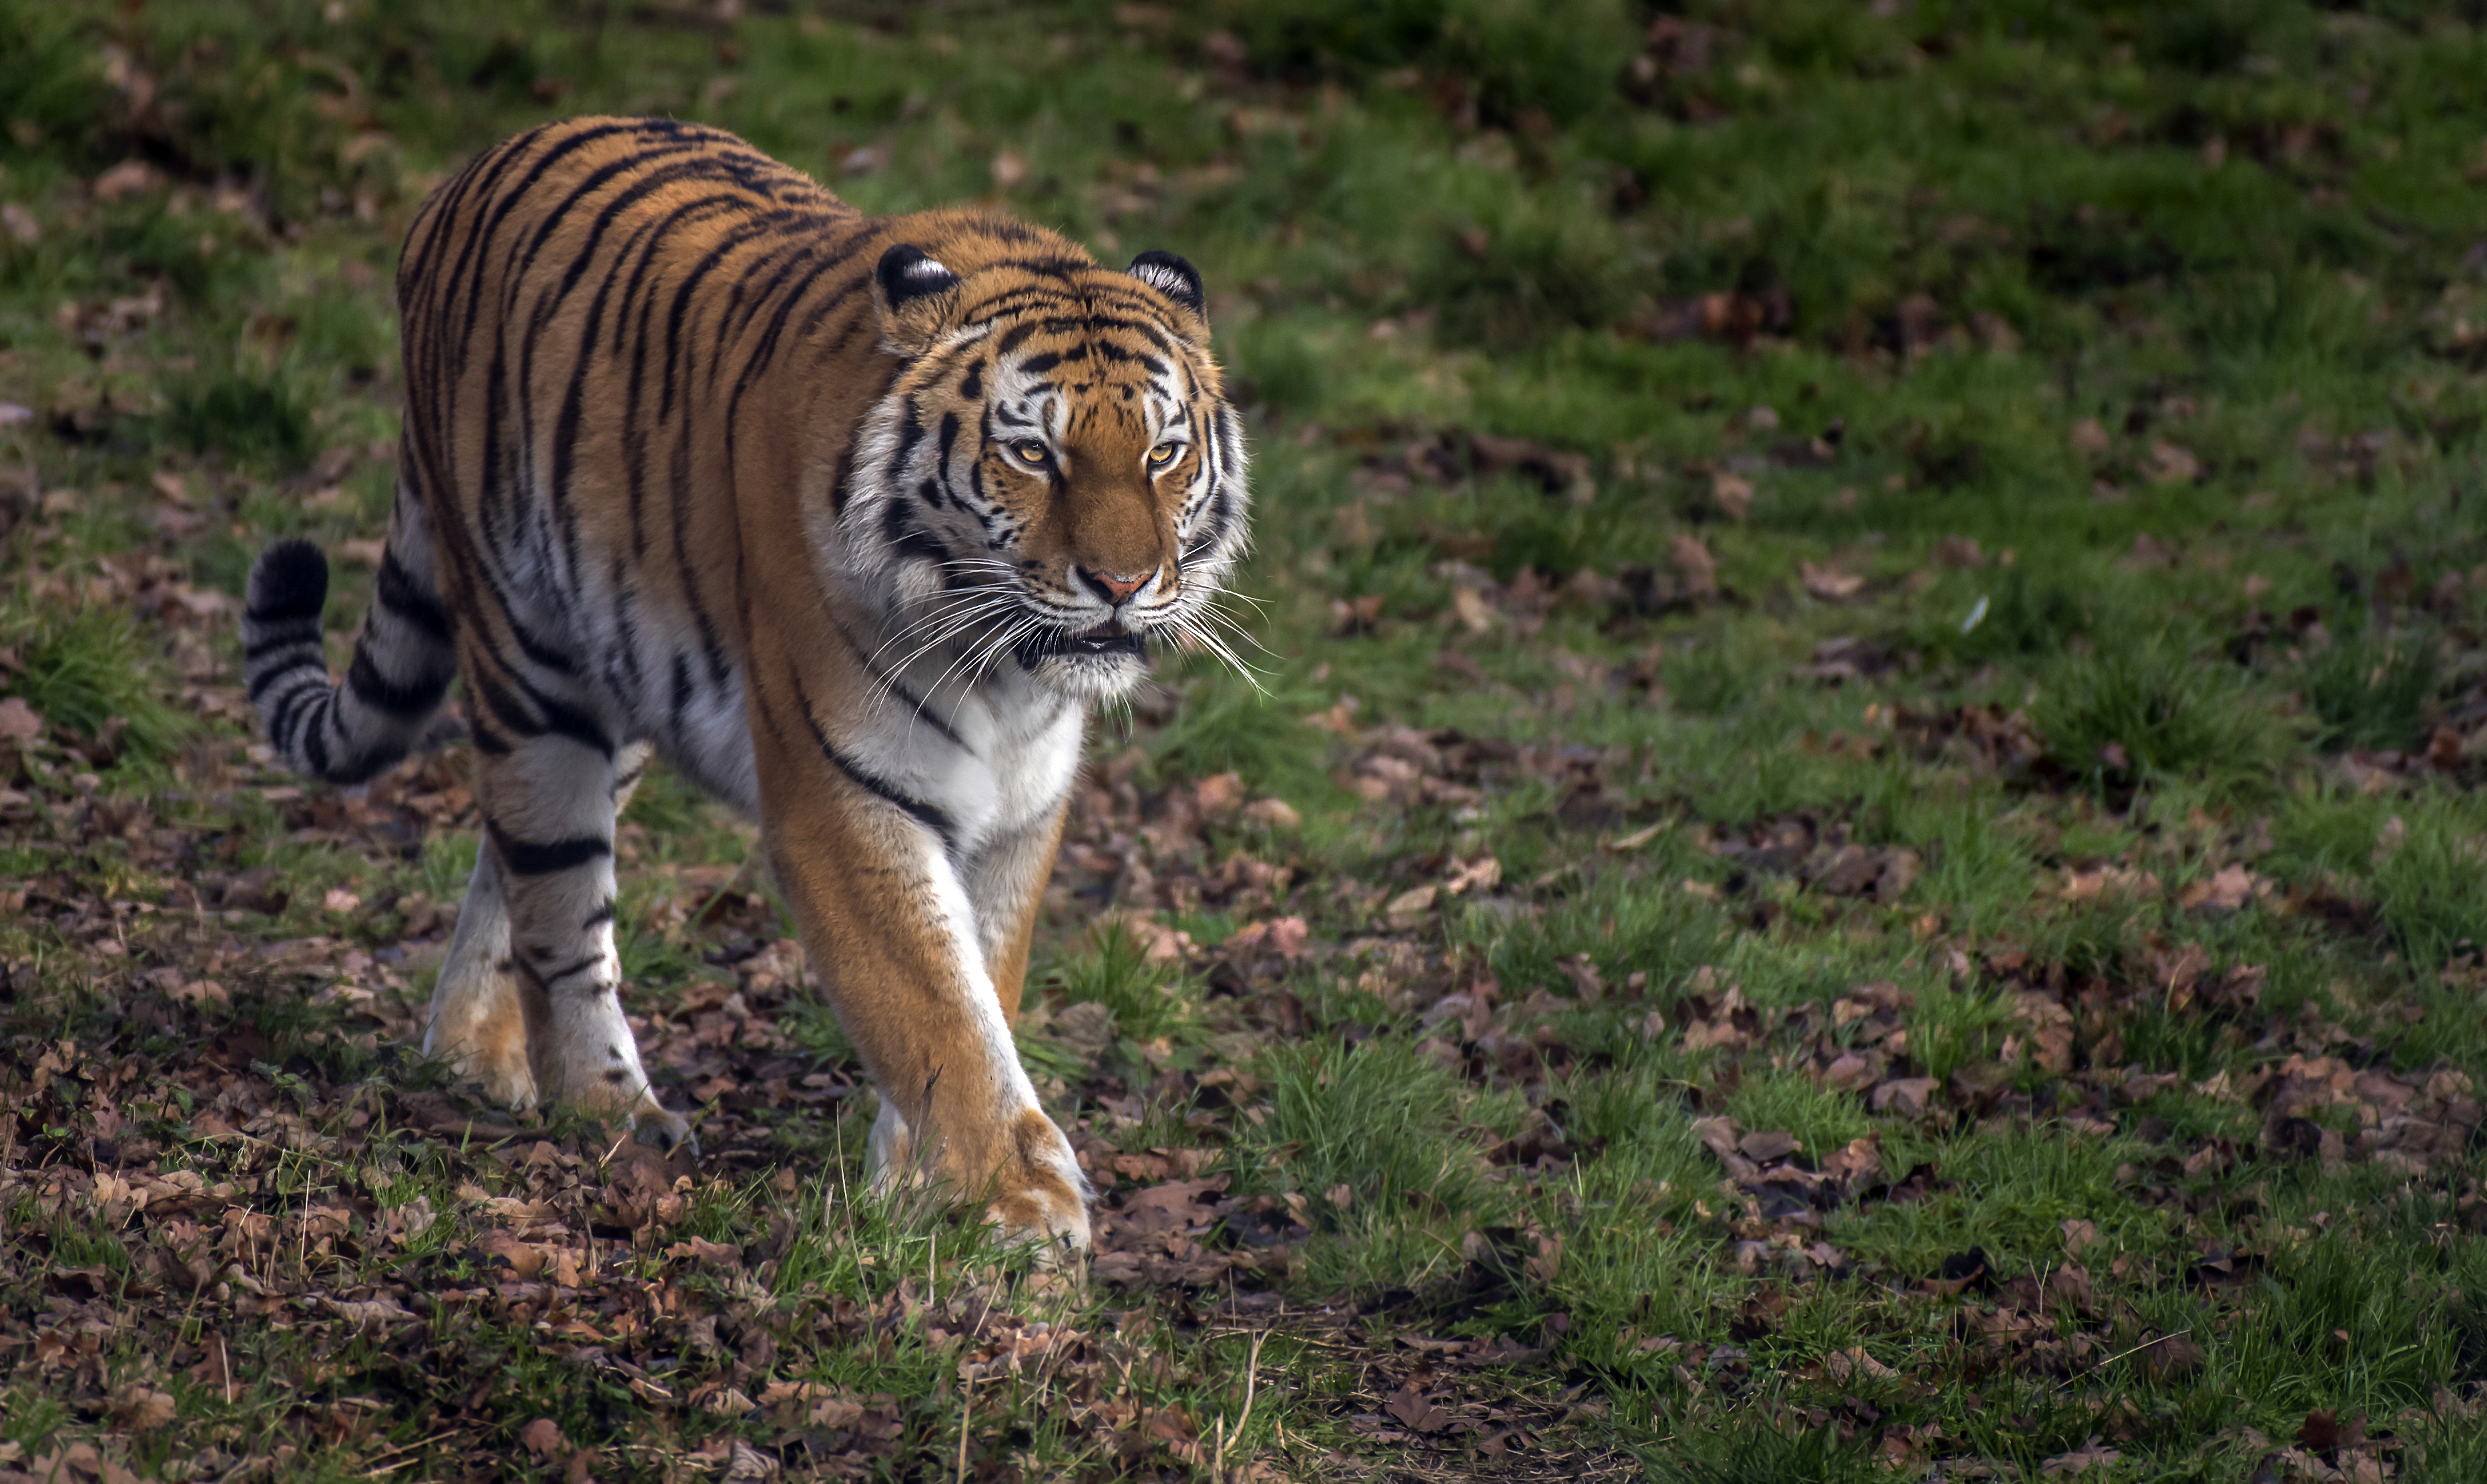 Pictures of the Amur tiger